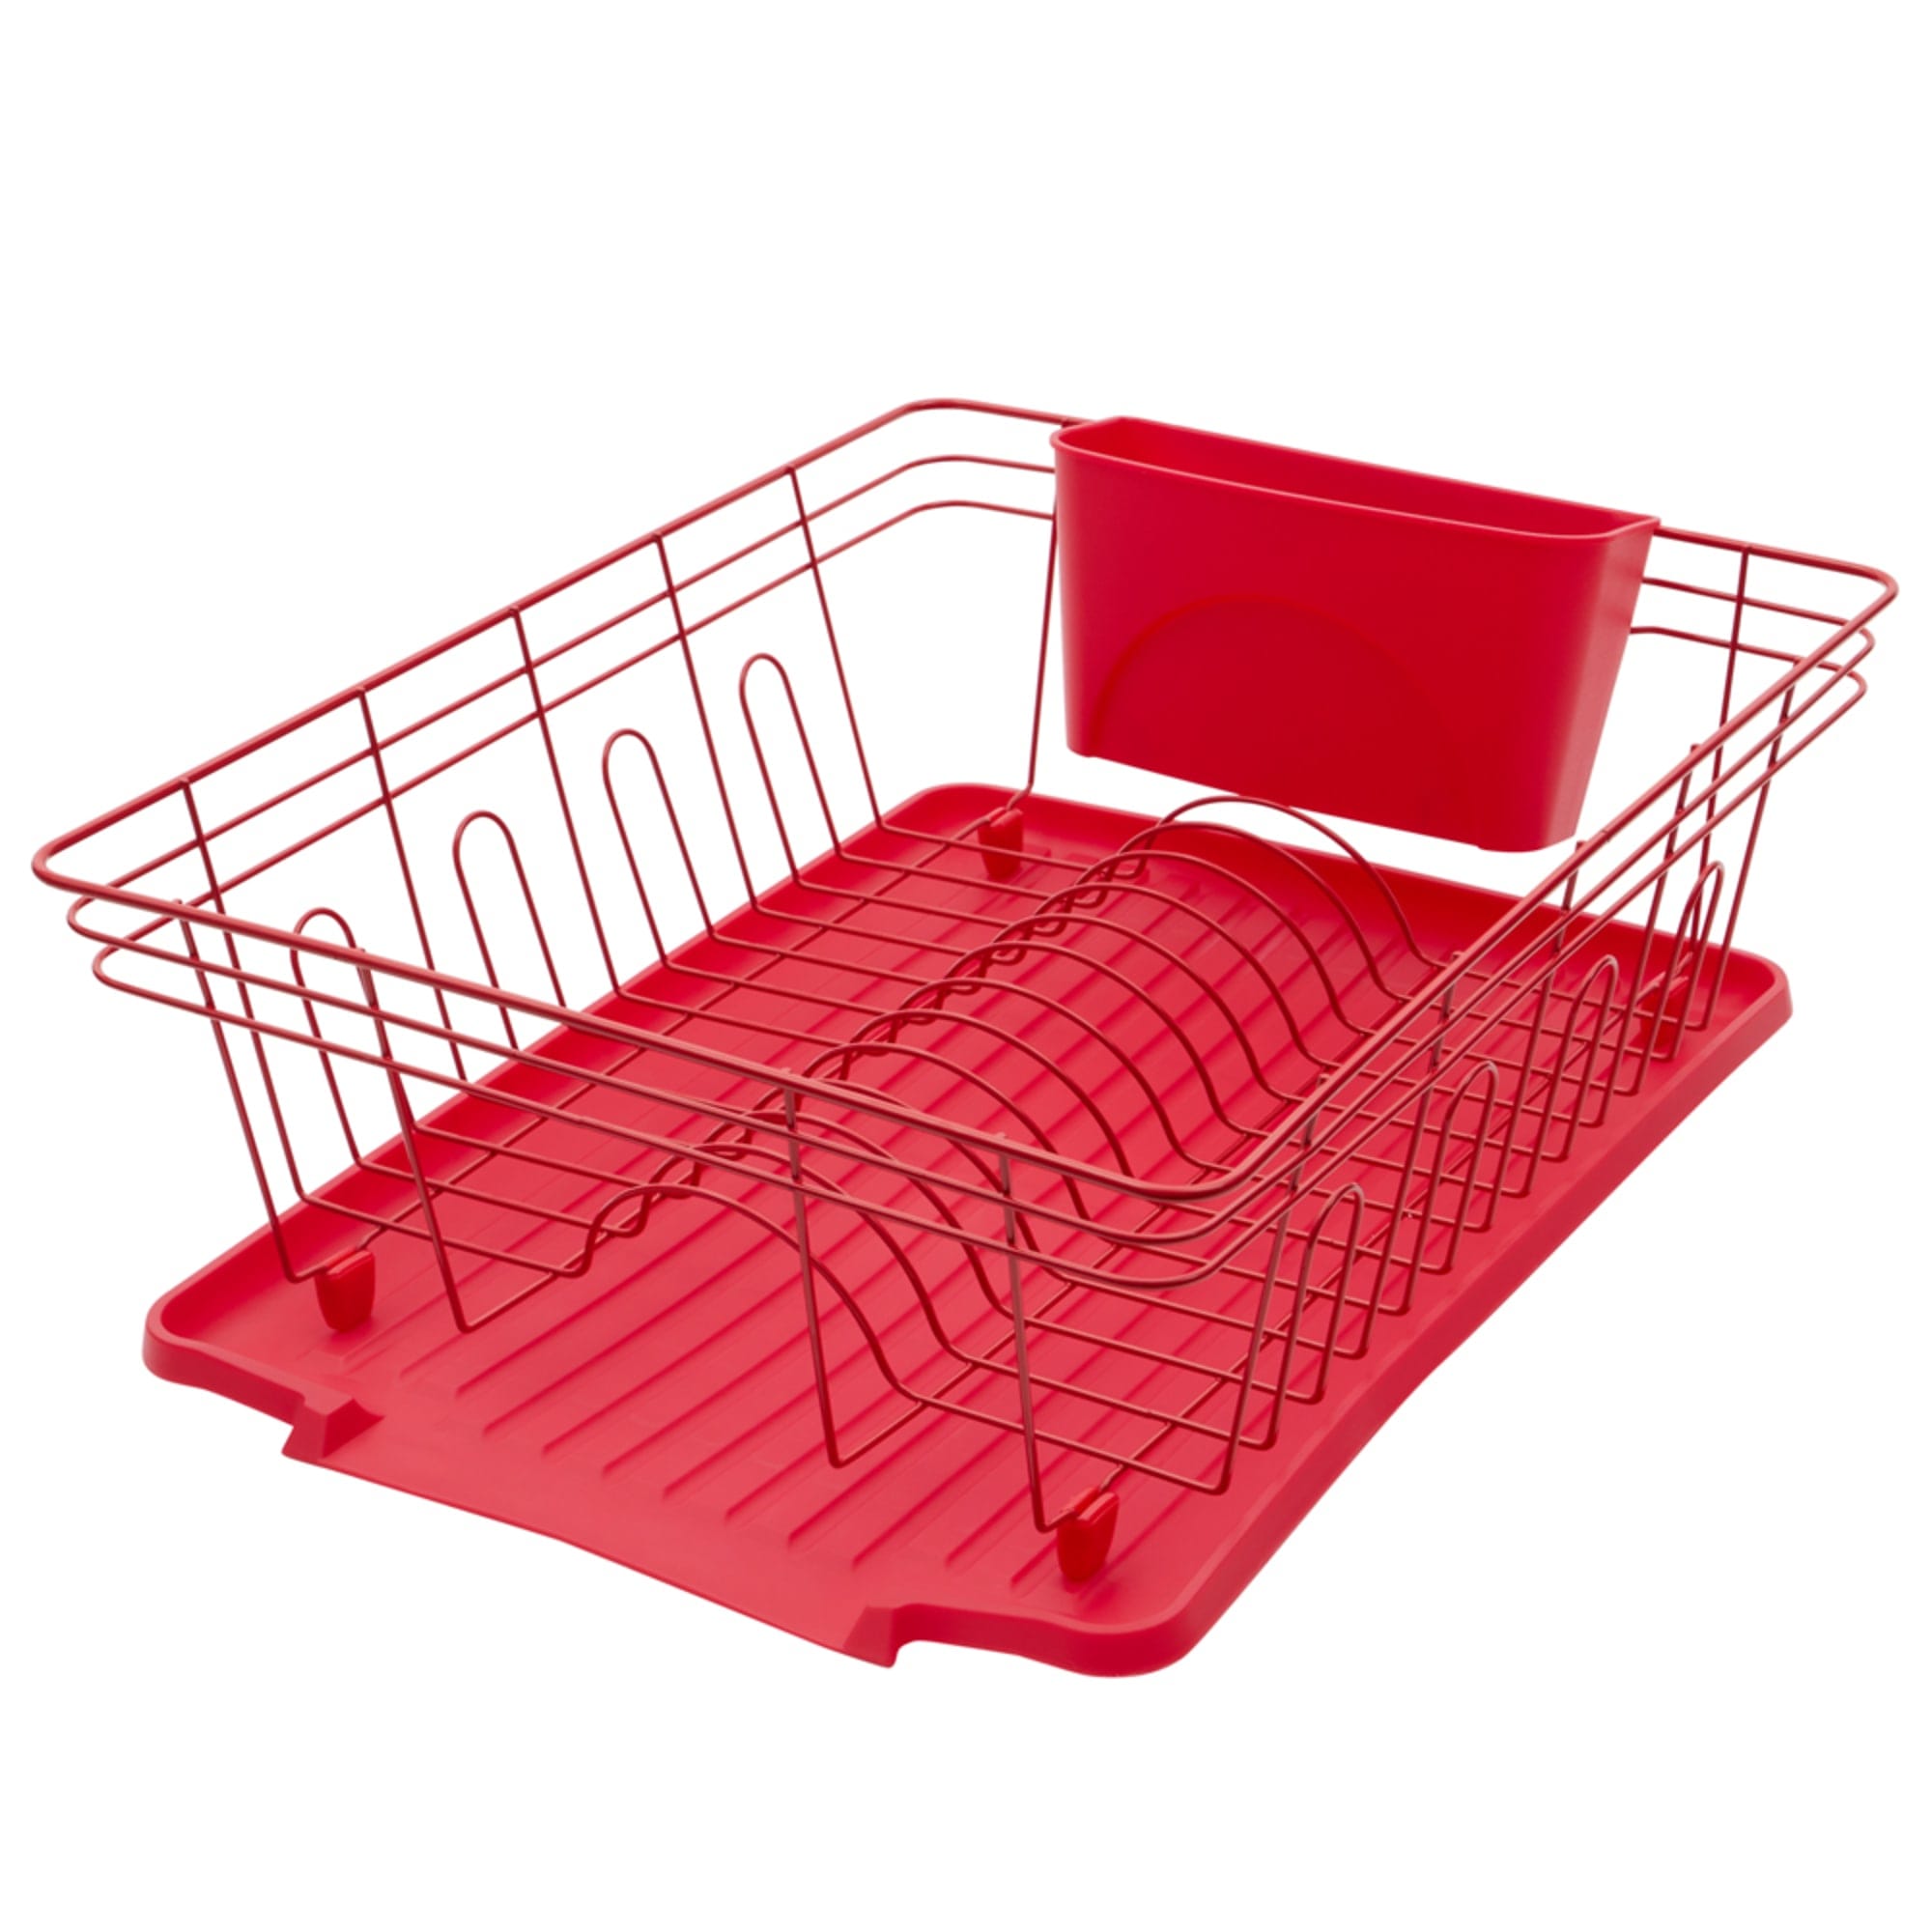 Home Basics 3 Piece Dish Rack, Red $10.00 EACH, CASE PACK OF 6